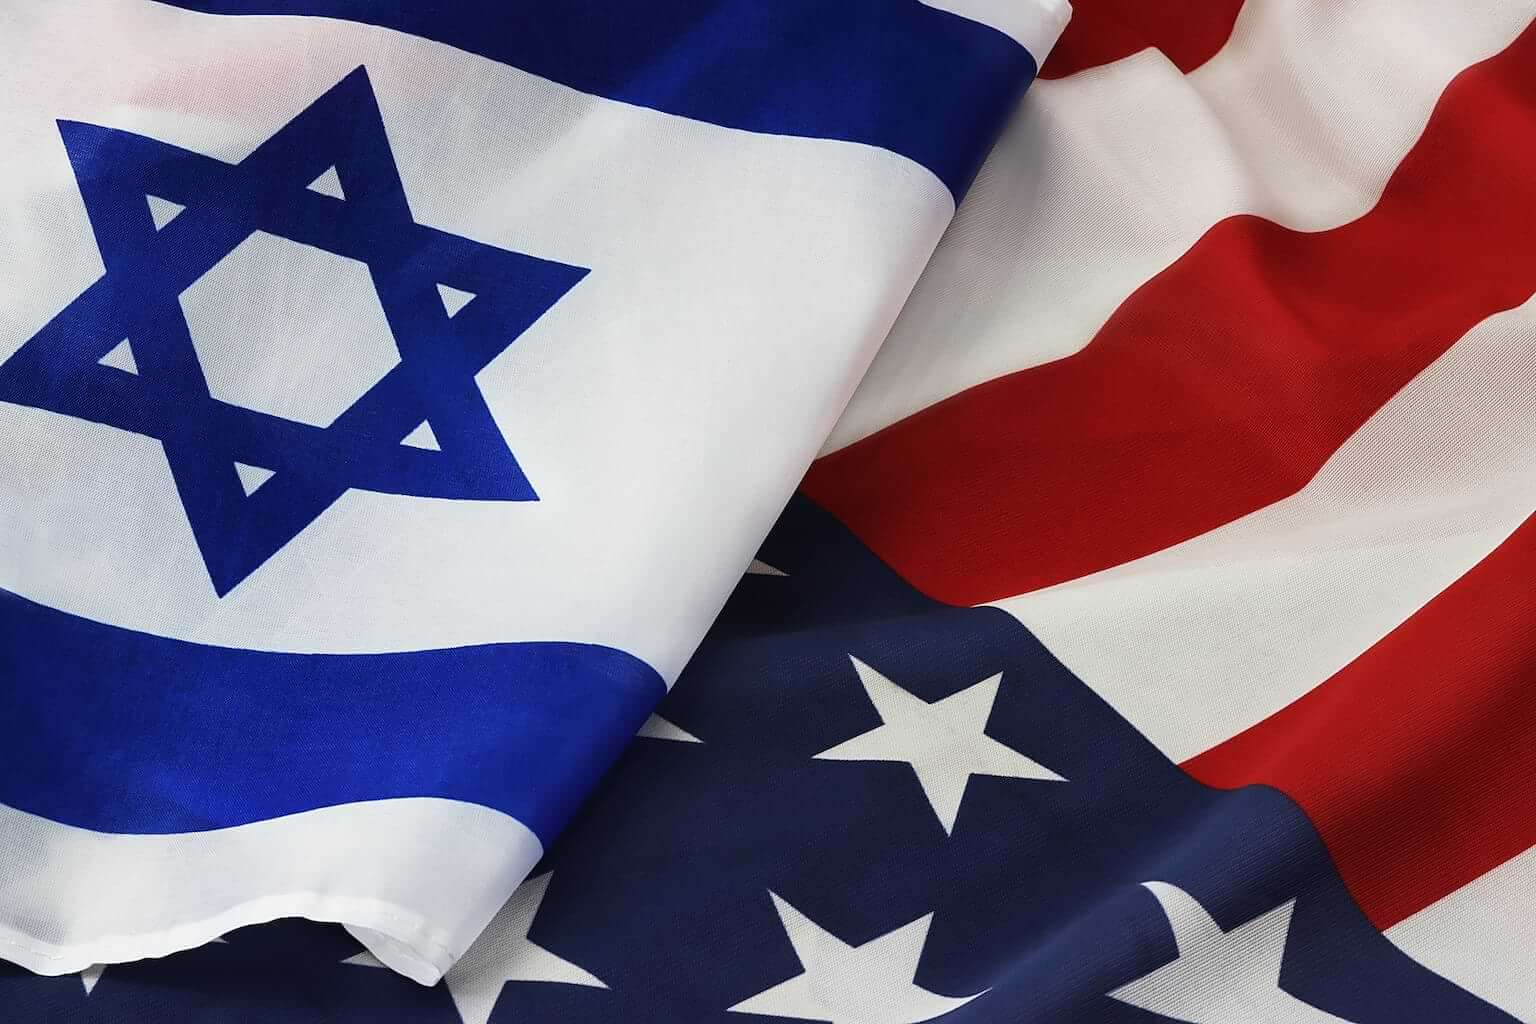 The flag of Israel sits atop the flag of the United States. By Shabtay/stock.adobe.com. This article states that America should support Israel.